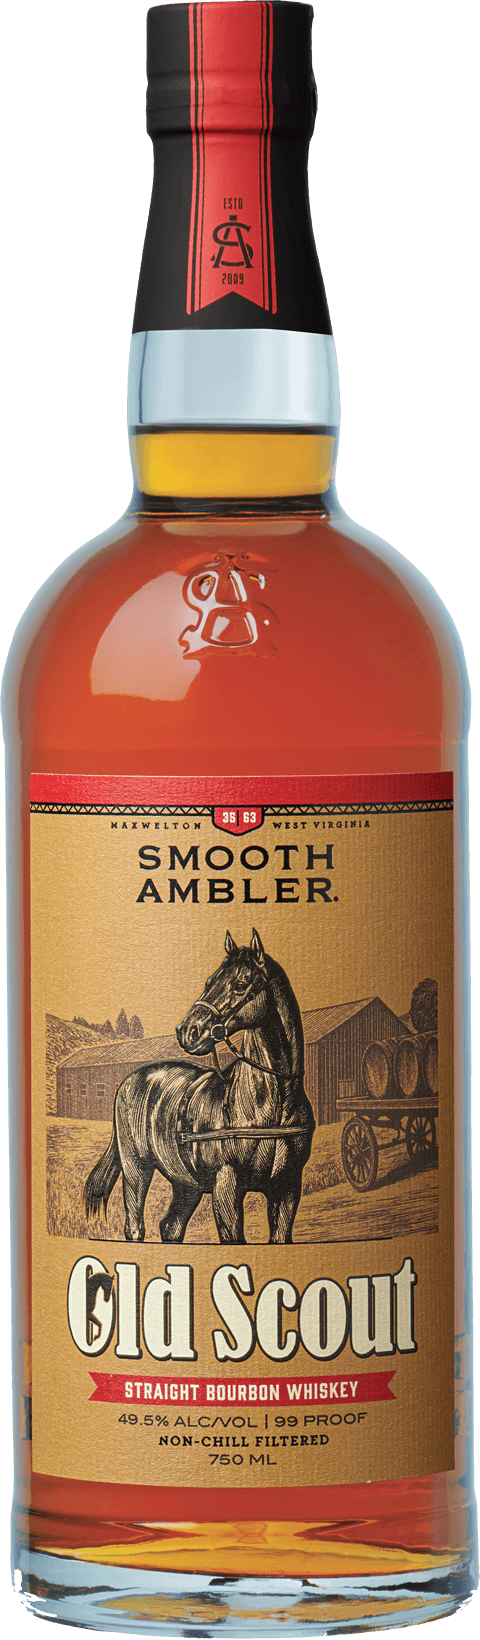 Smooth Ambler Old Scout Straight Bourbon Whiskey Bottle